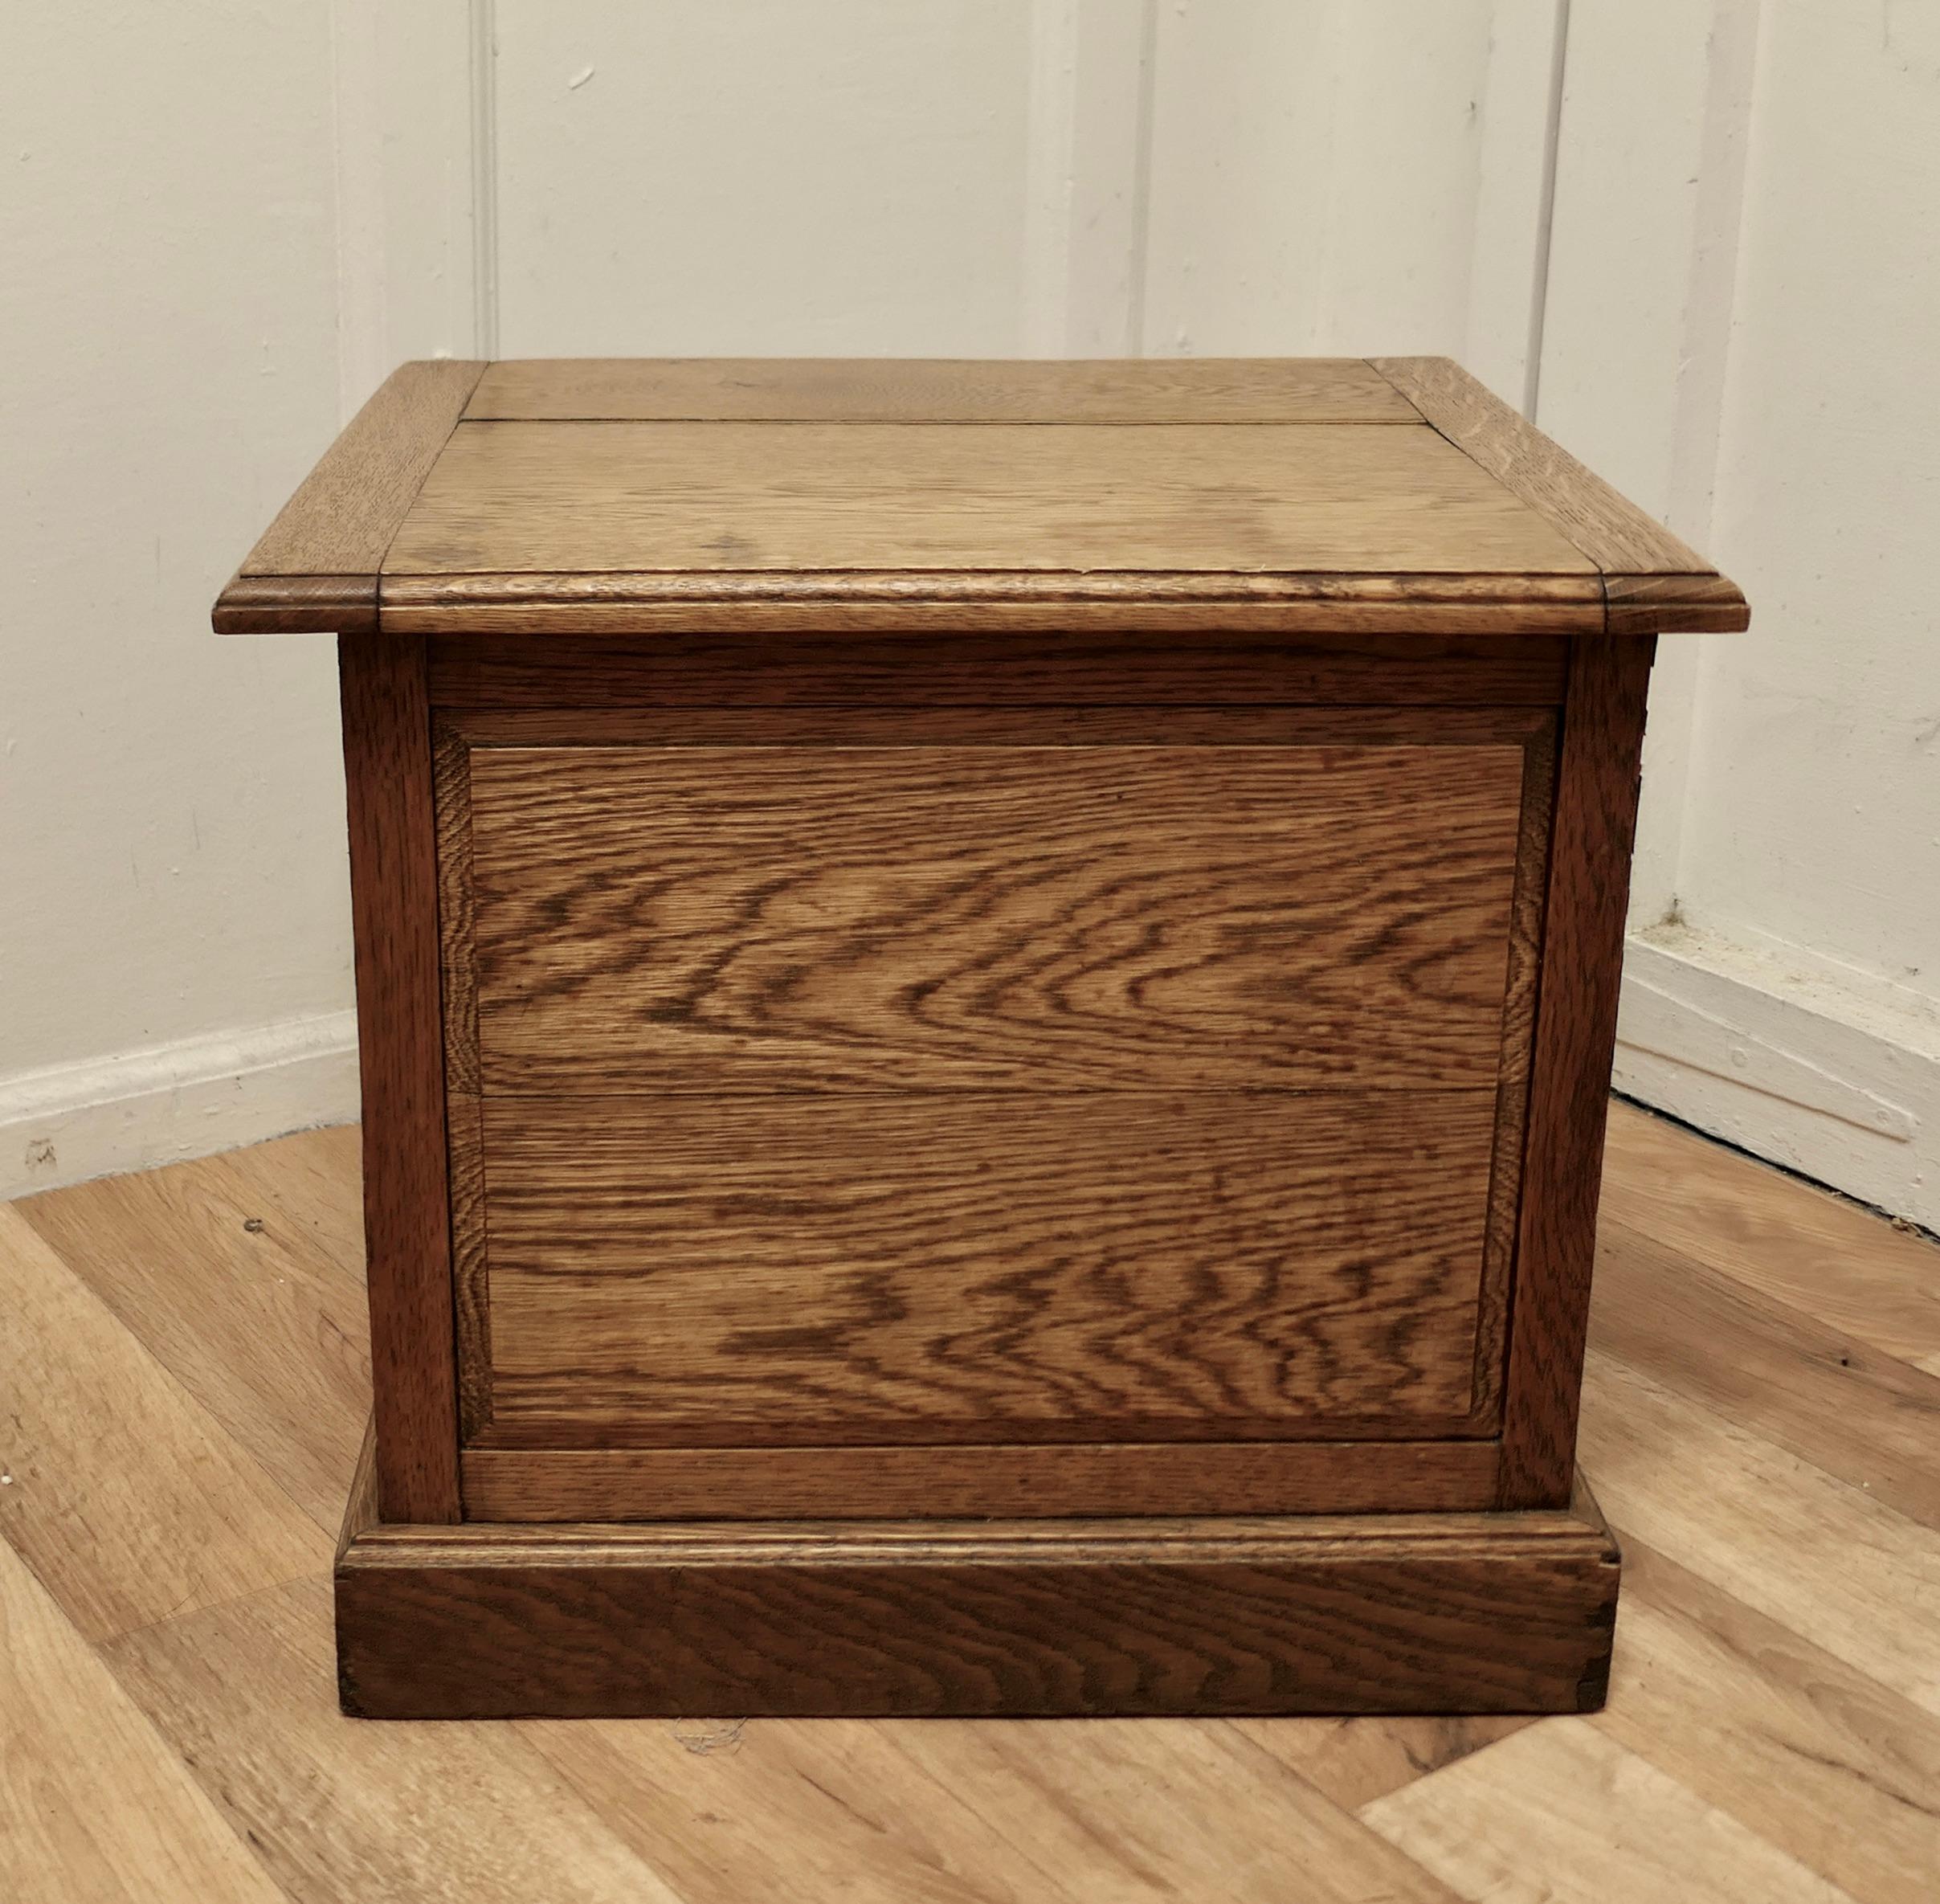 Arts and Crafts Golden Oak Log Box, seat or occasional table

This is a good quality storage box, it is a good height for a fireside seat and would work well as a Log Storage Box as it is a good size 
The Box is 18” high, 20” long and 17.5 ”